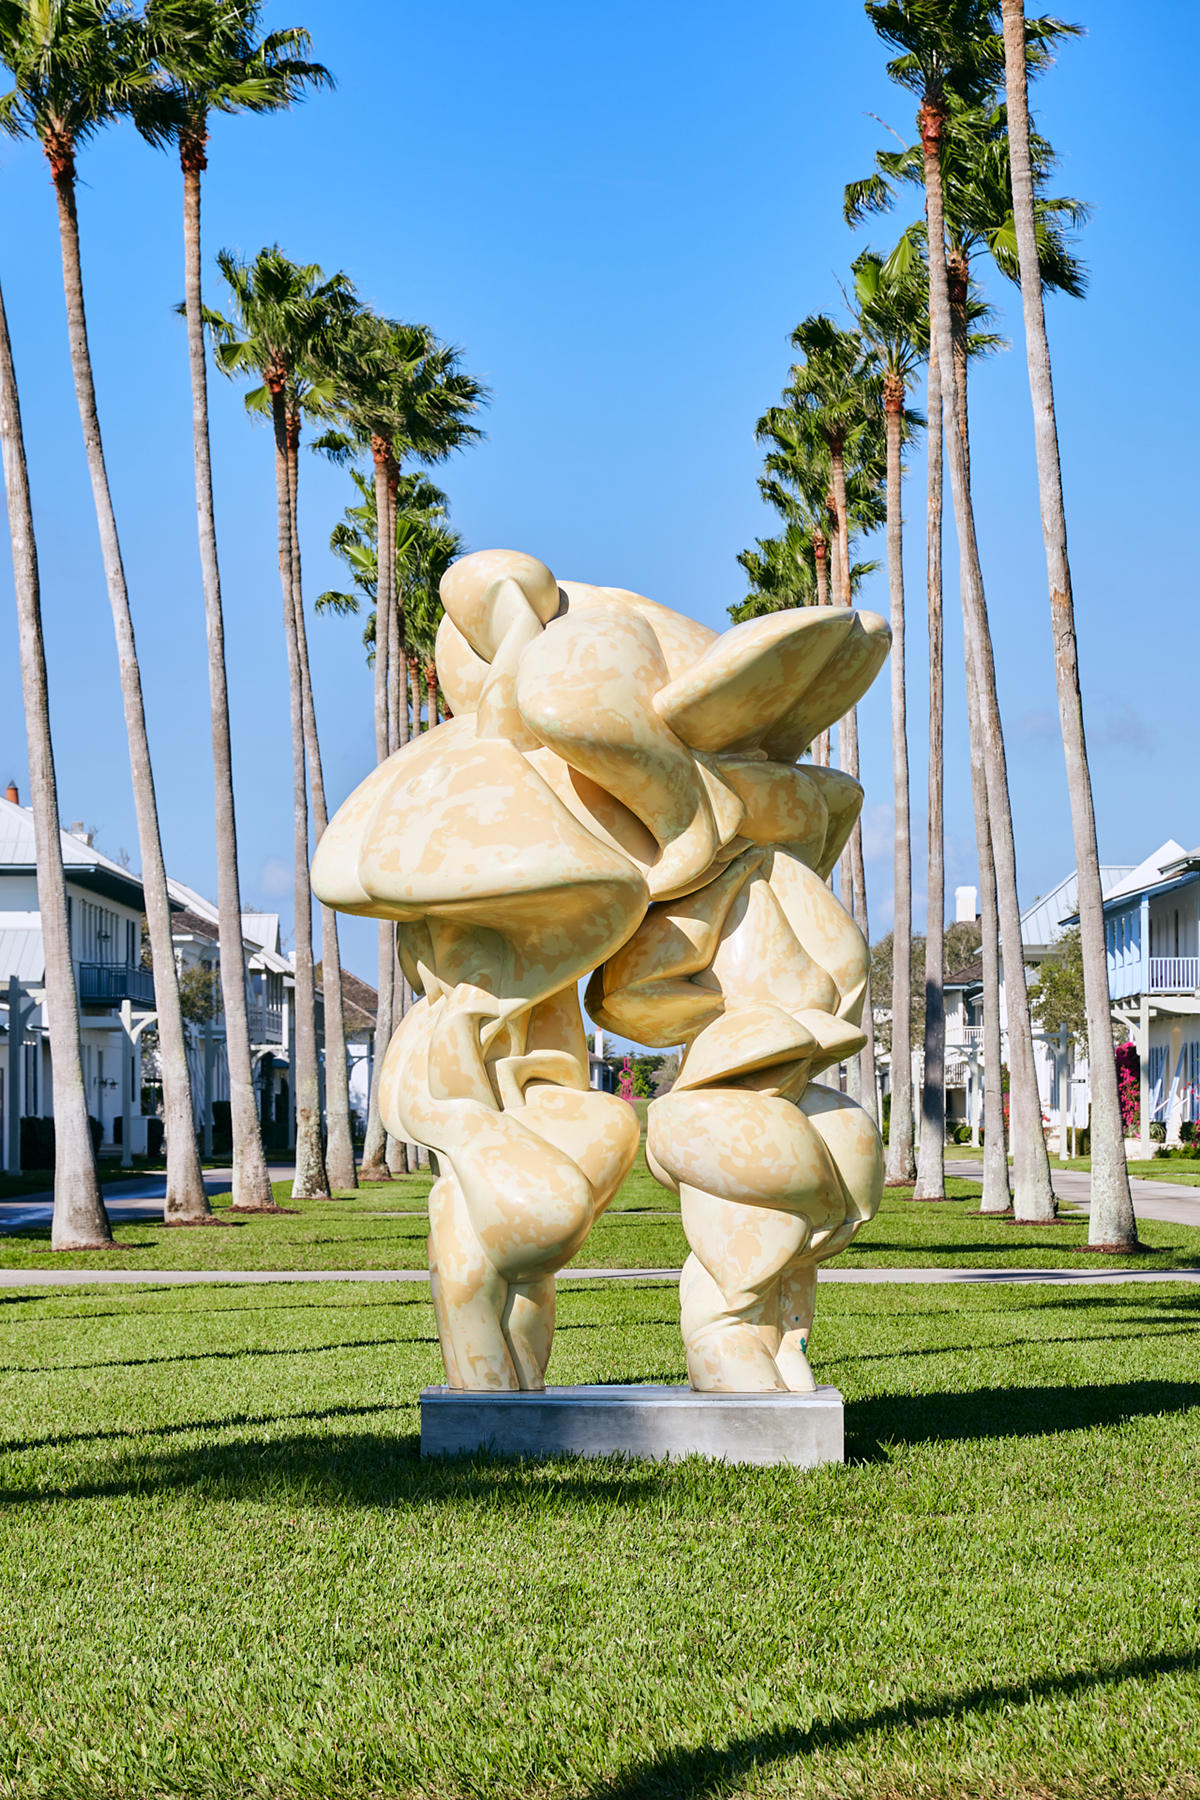 A beige statue on grass with palm trees around it